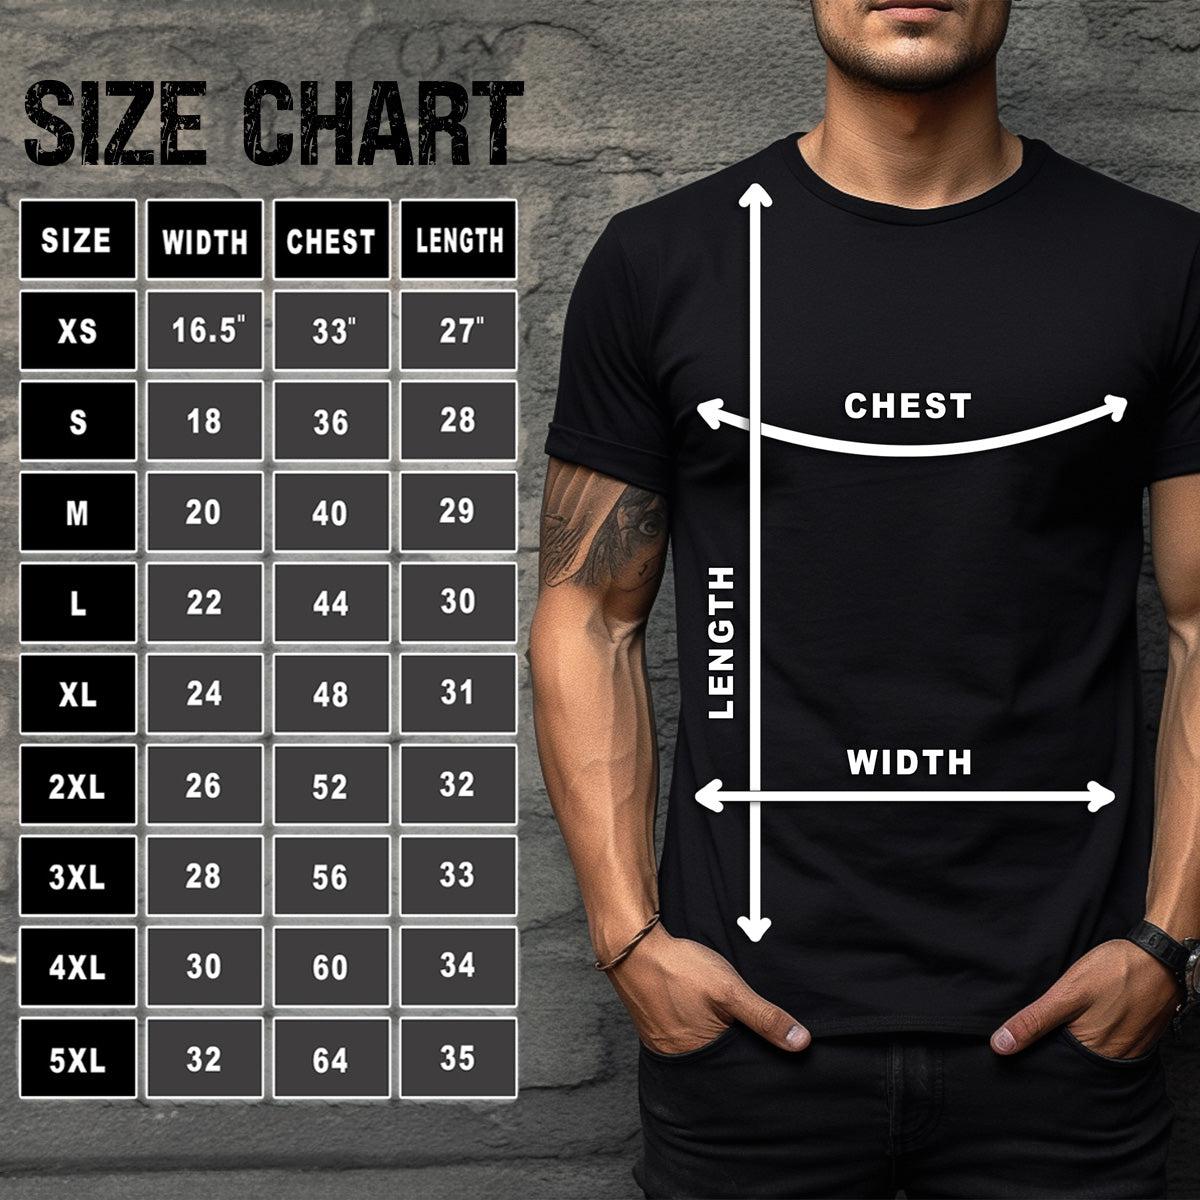 Cool Dad Level Expert Mens Graphic Tee